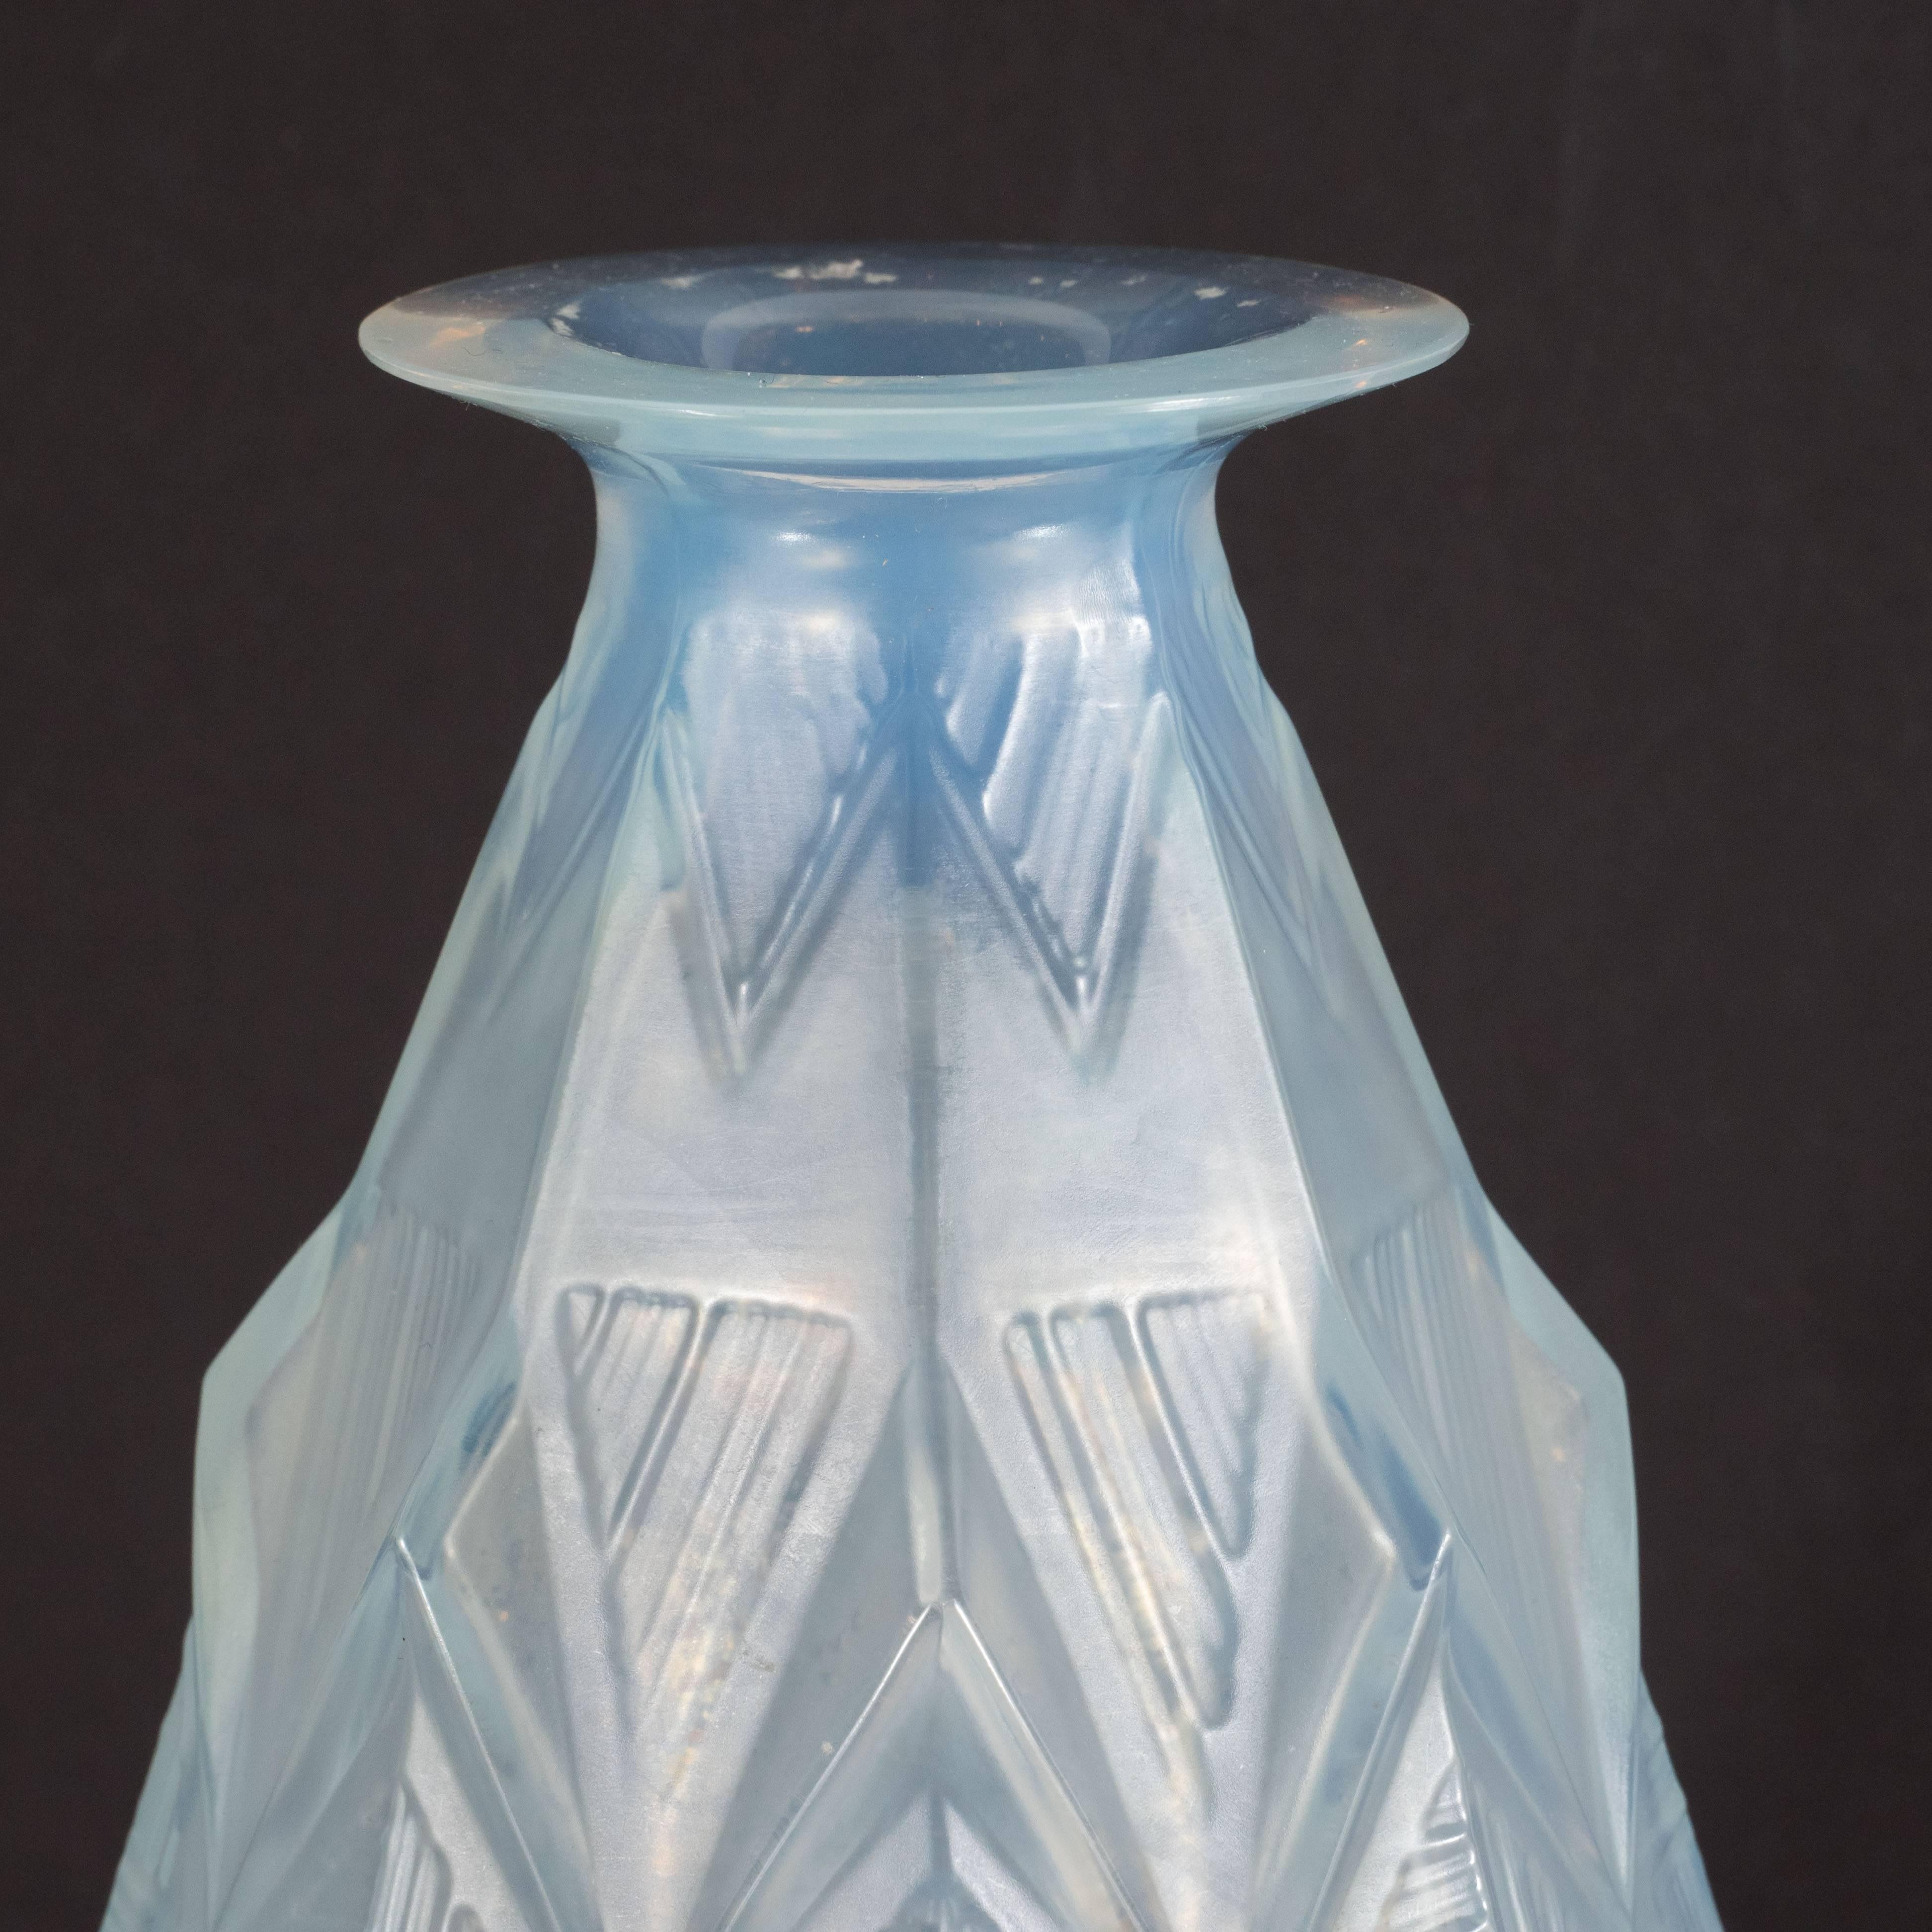 This stunning vase was realized by the illustrious glass blowing atelier, Sabino, in France, circa 1930. It features a subtly tapering body that dramatically flares at its mouth, as well as raised rectilinear geometric designs throughout. This is a